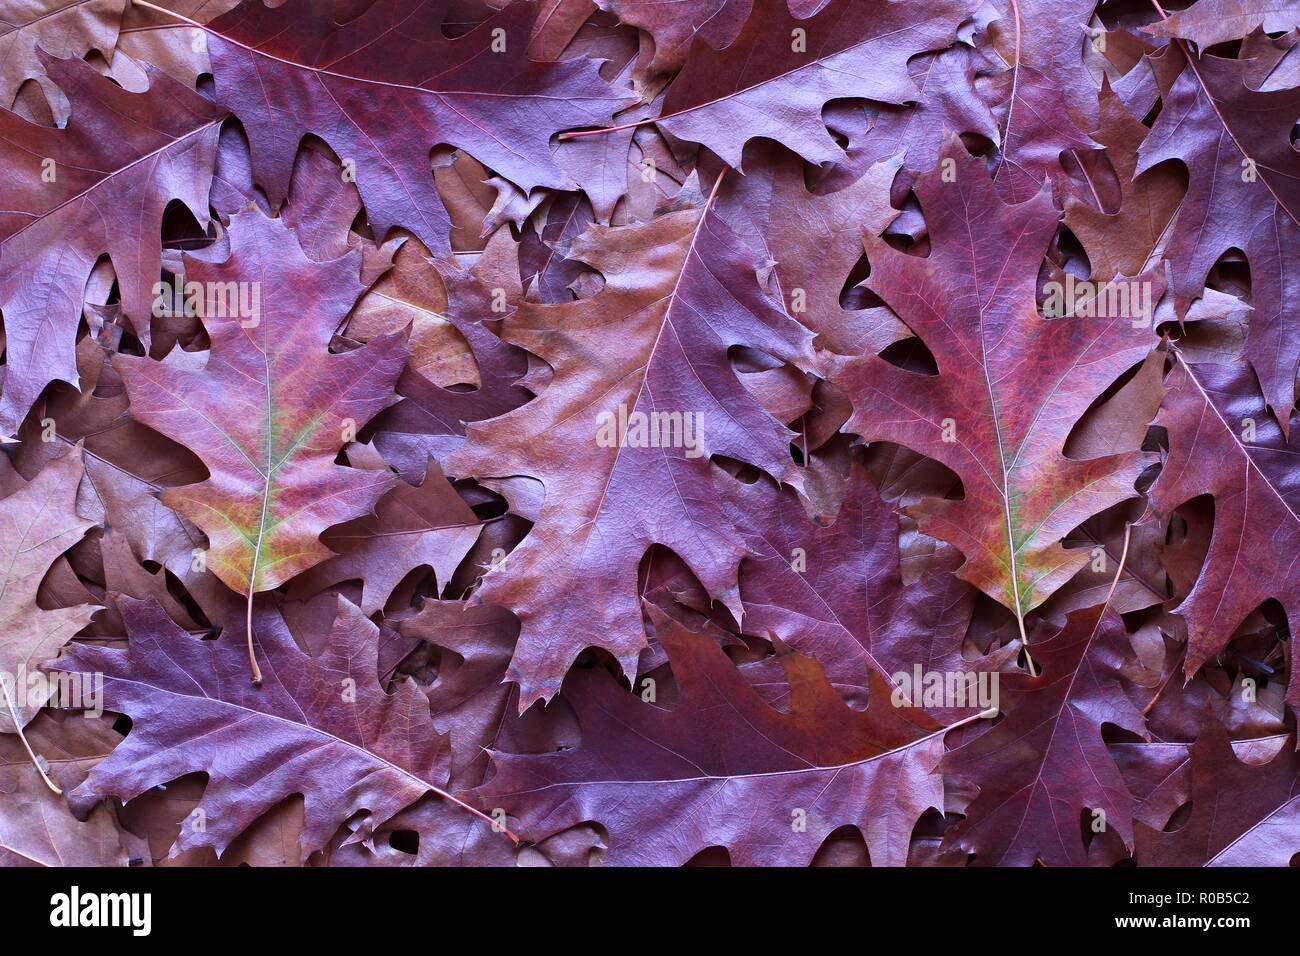 Autumn background - dry brown, red and purple oak leaves Stock Photo